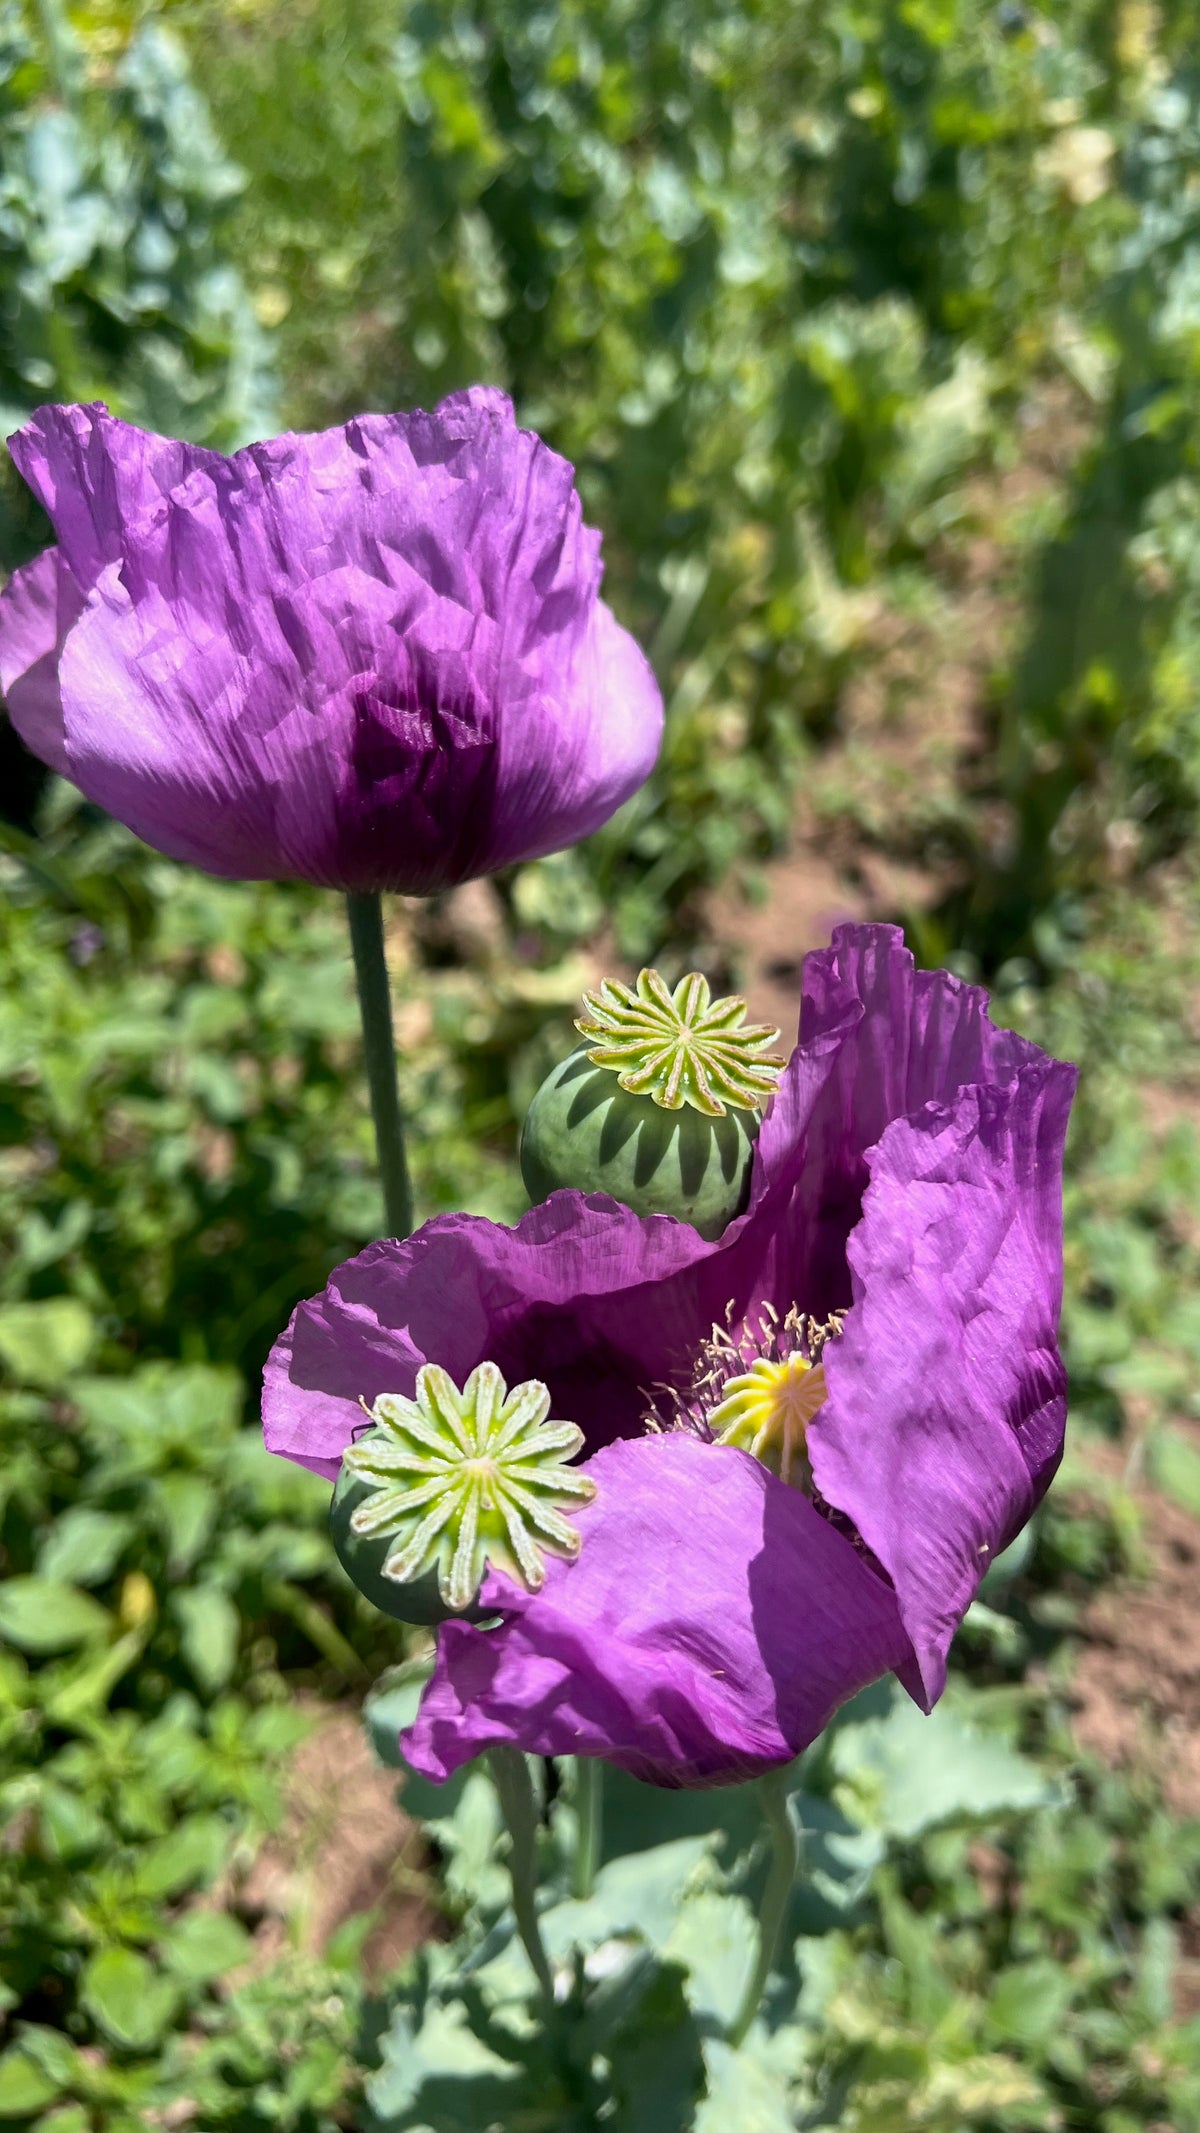 Hungarian Breadseed Poppy